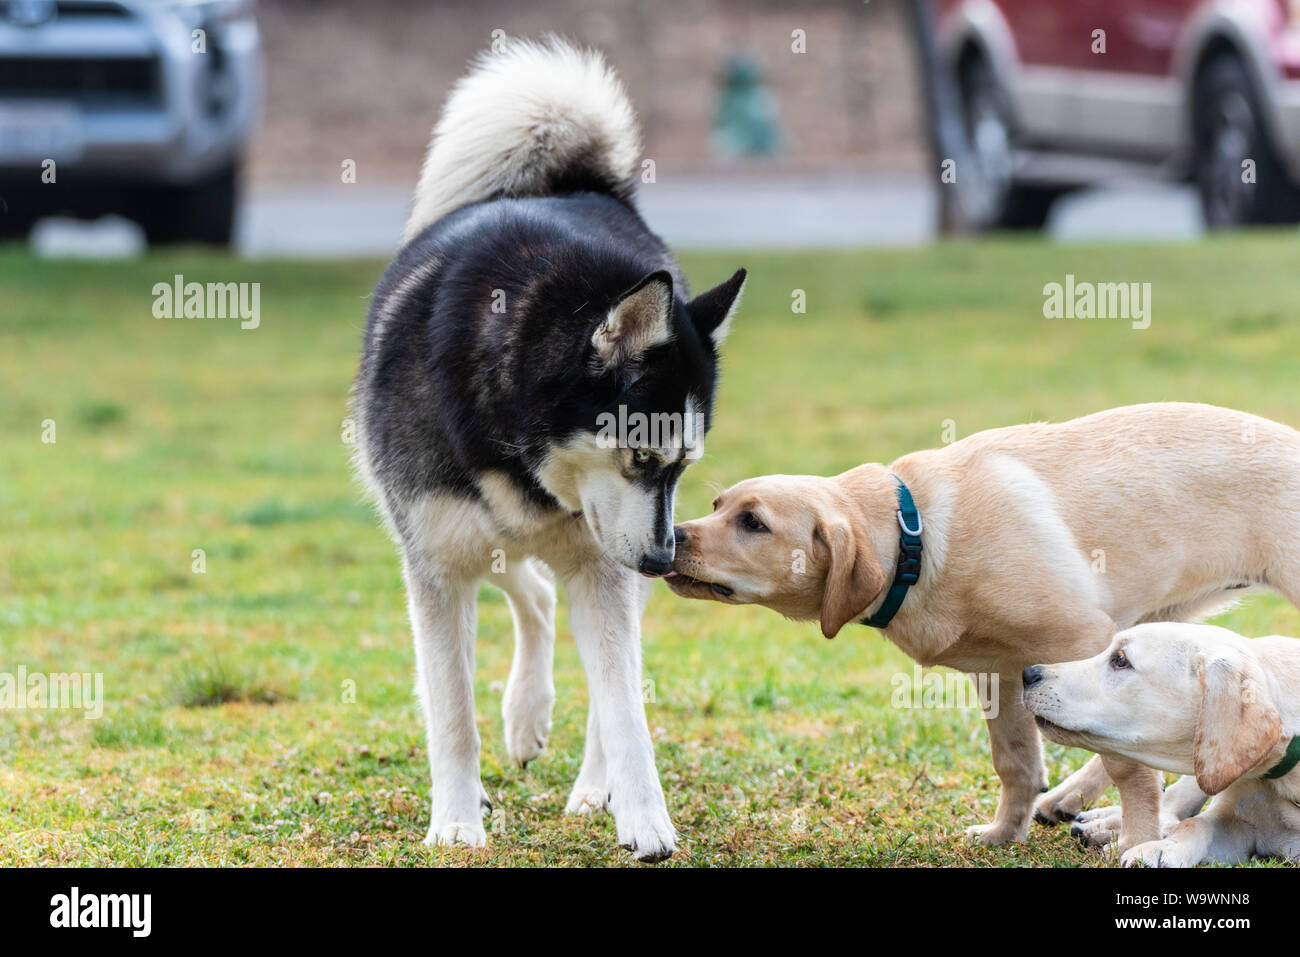 Siberian Husky being licked by yellow Labrador puppy during a first encounter meeting at dog park. Stock Photo